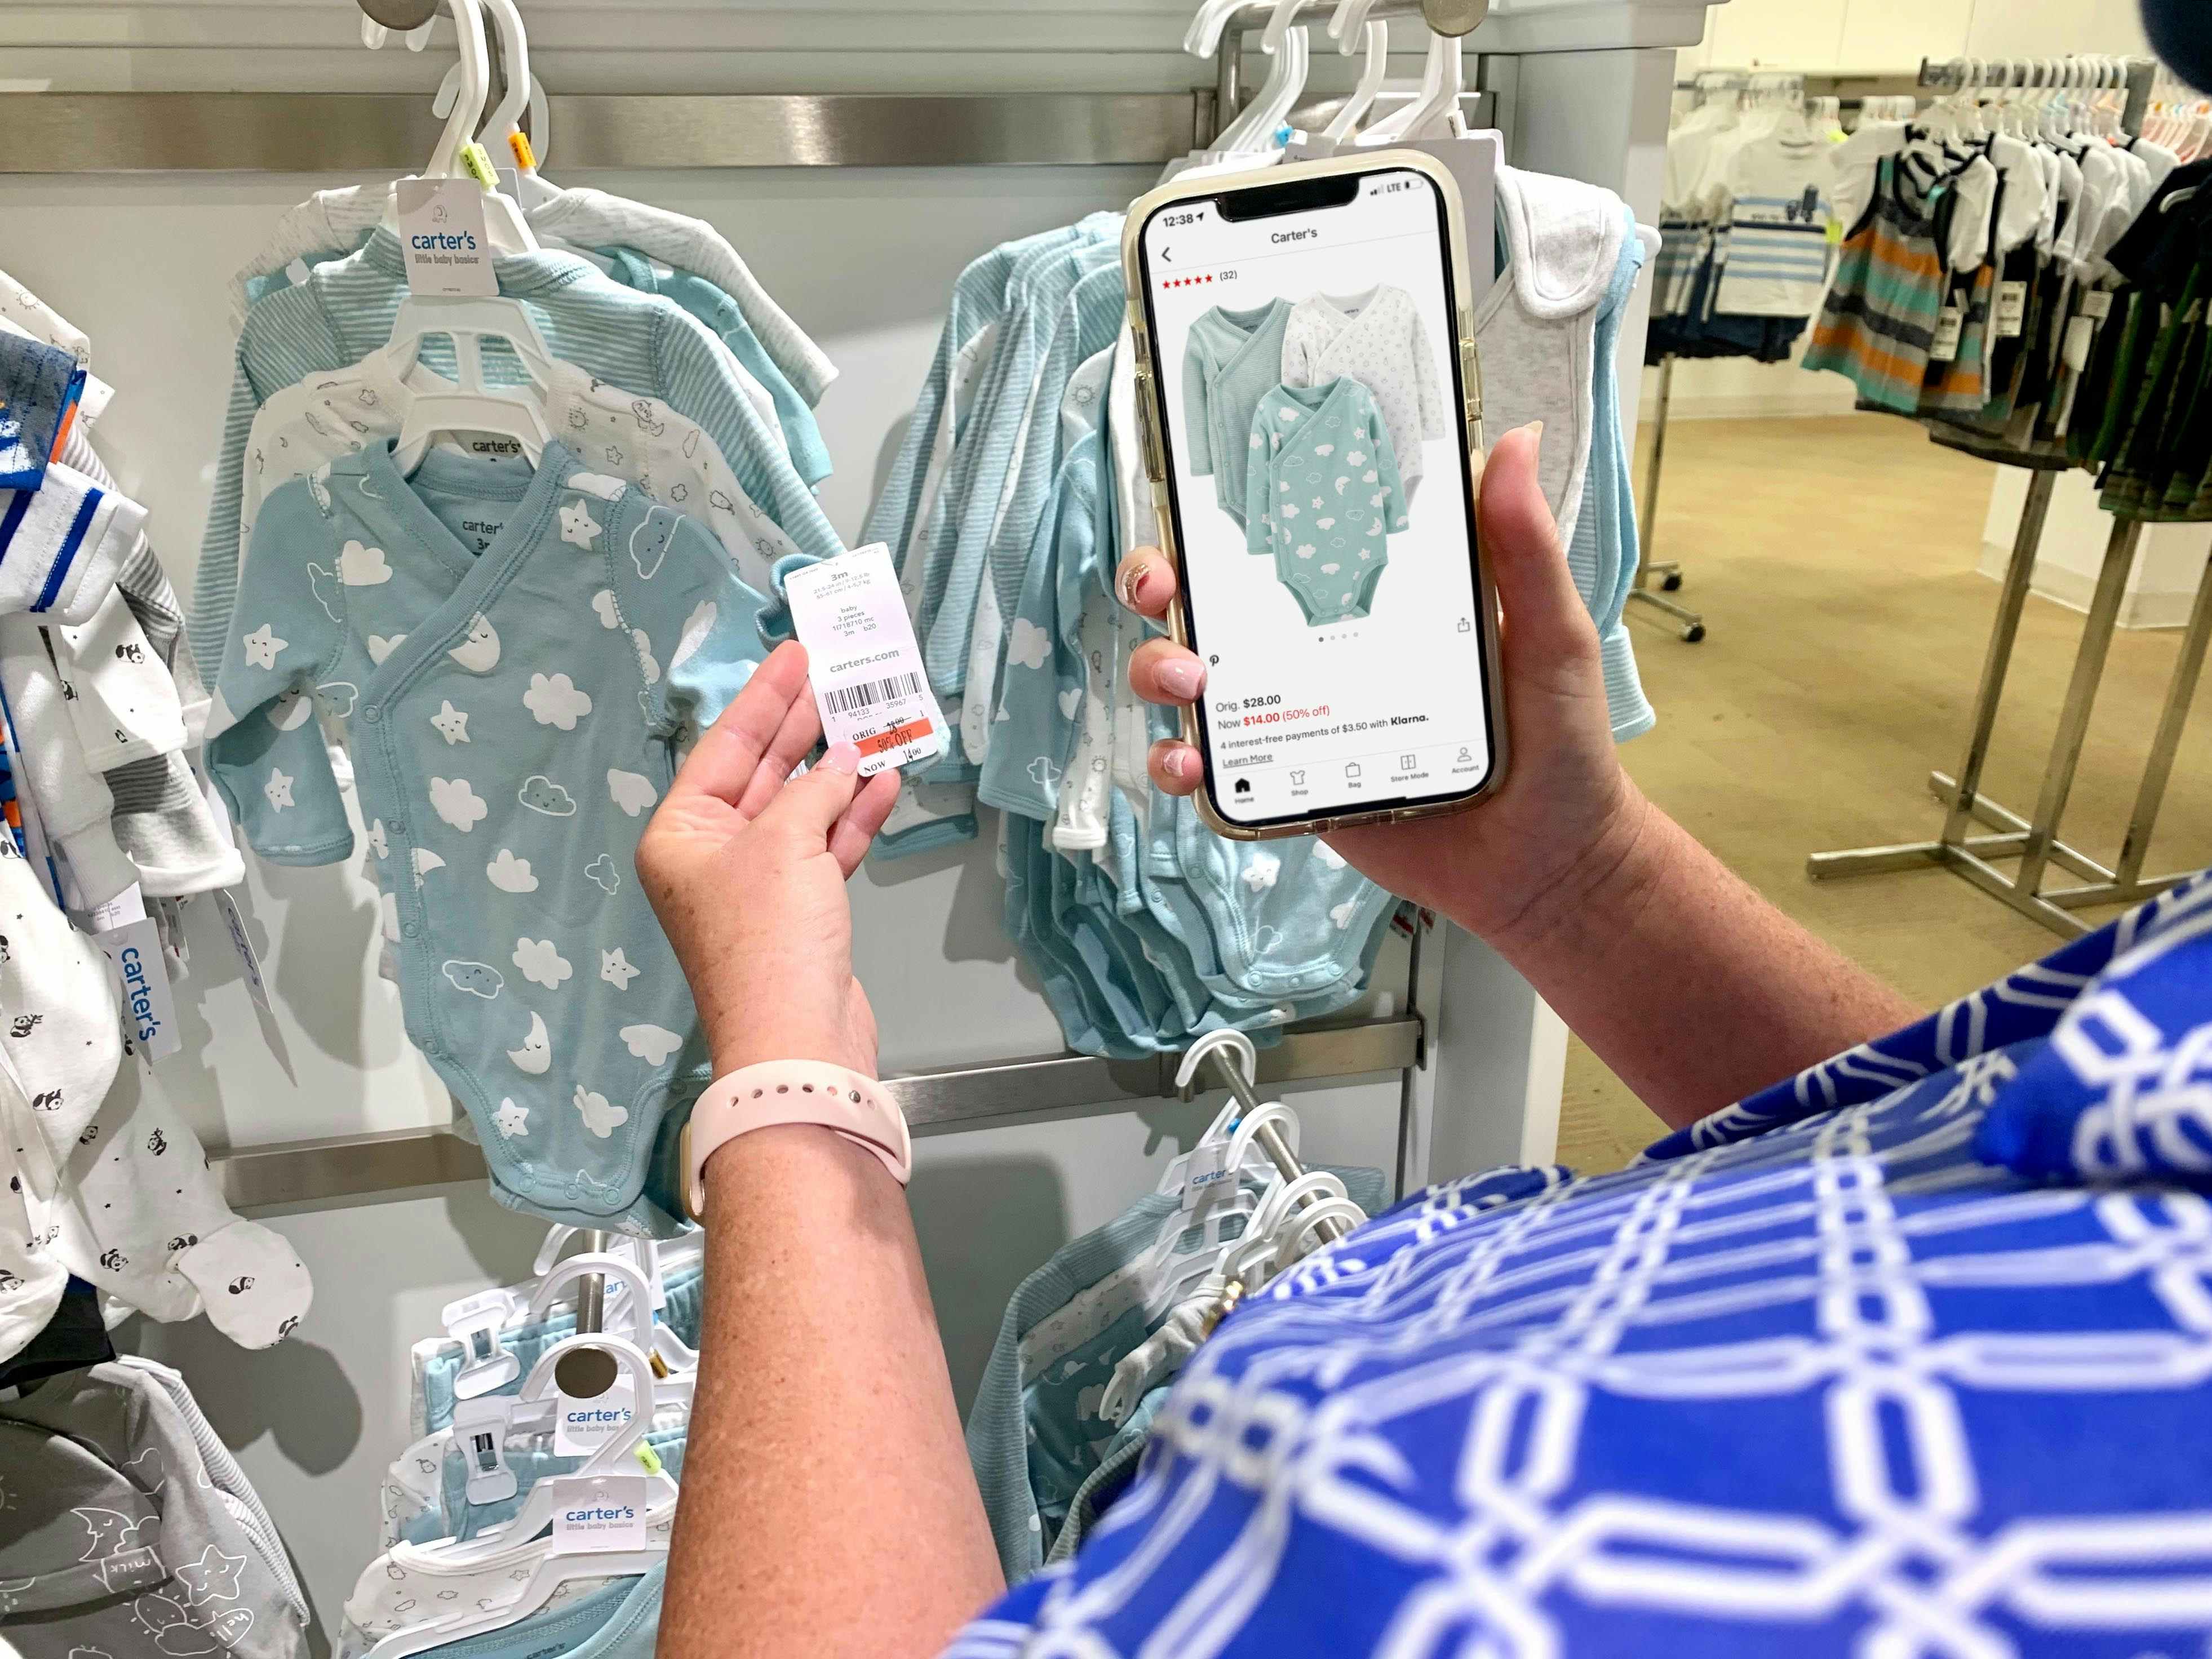 cwoamn comparing price on app and on baby clothes on rack 